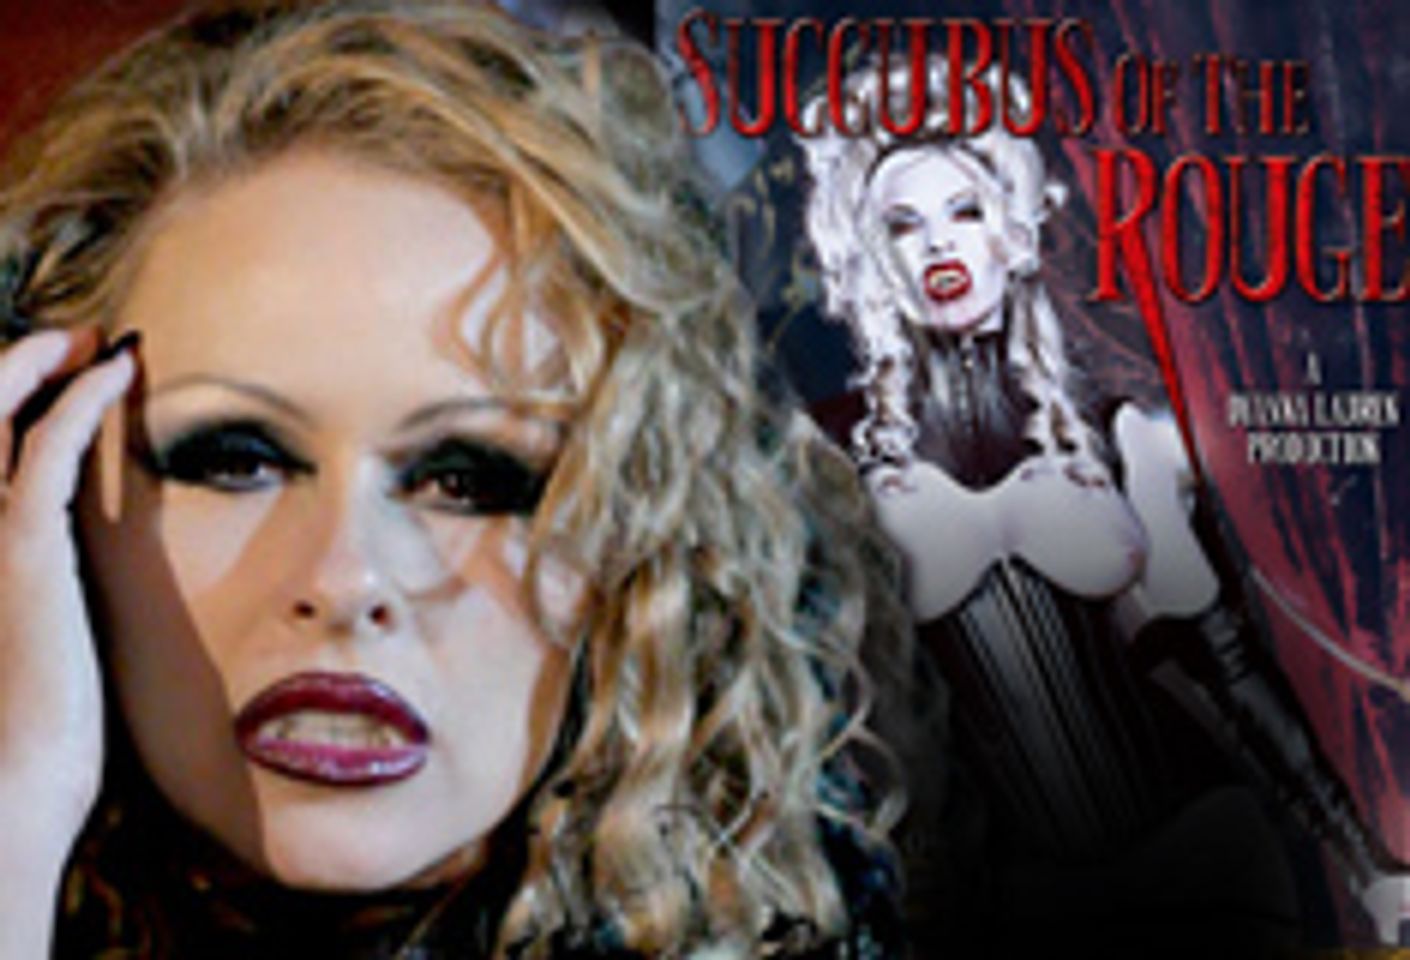 xPeeps and Spearmint Rhino Films Sponsor Halloween Release Party for <i>Succubus of the Rouge</i>